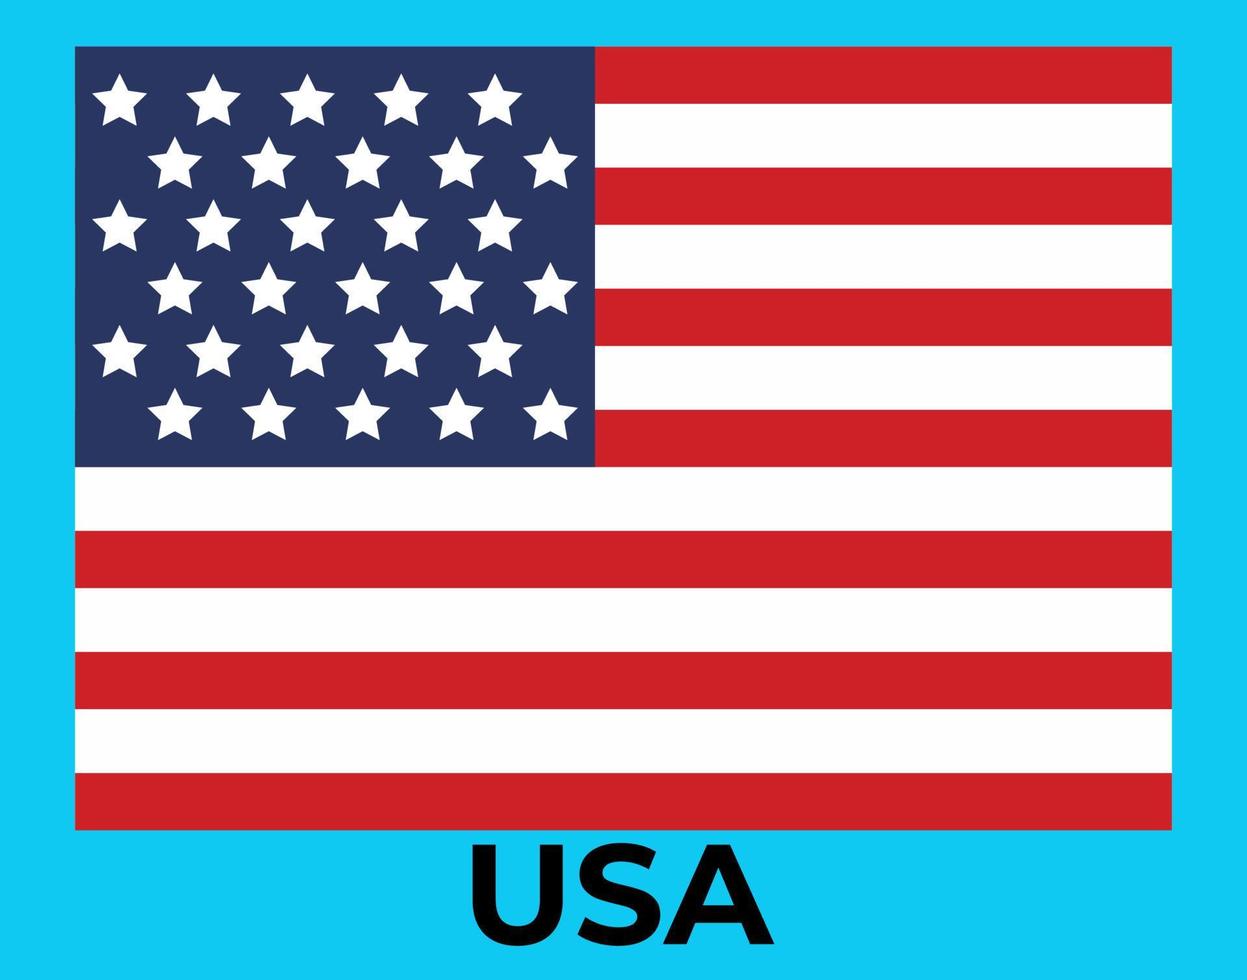 USA National Flag Vector illustration,  the United States of American Flag